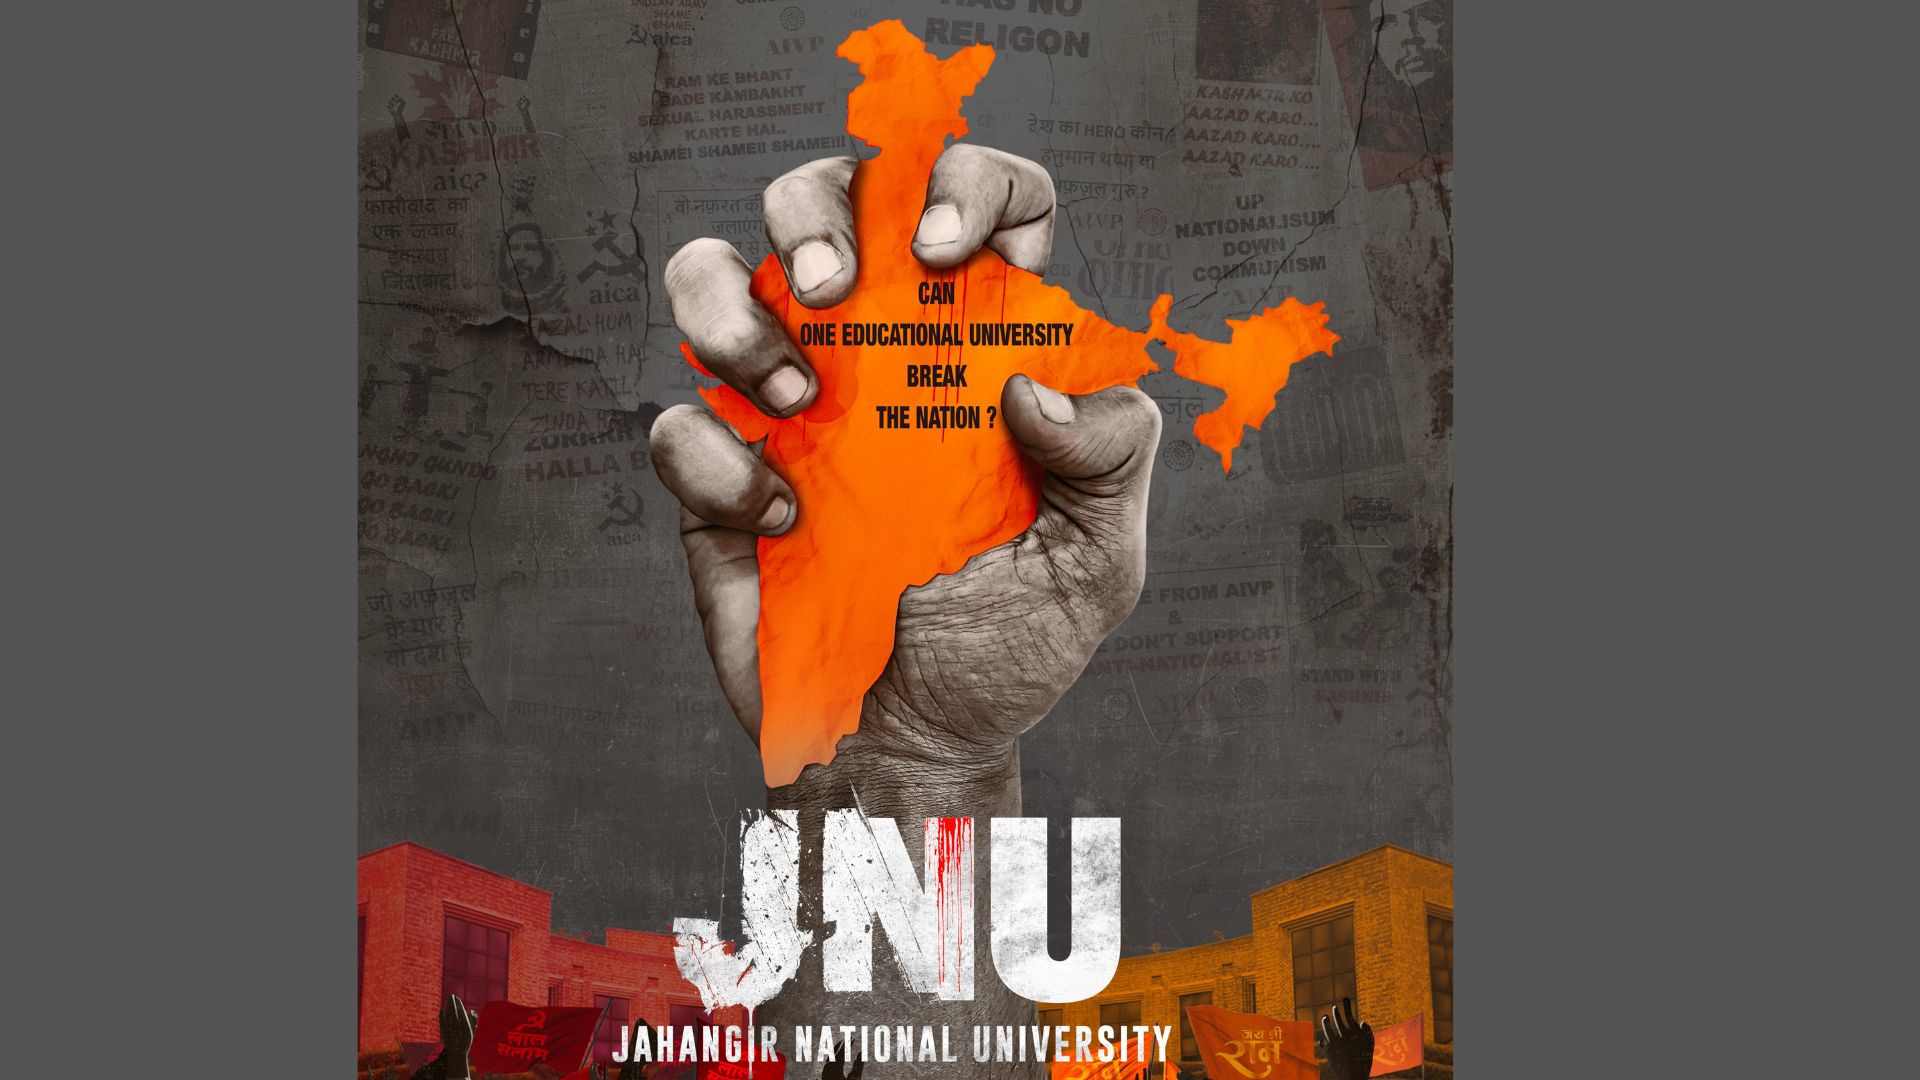 The release date for the film 'JNU' has been delayed, and a new release date has not been determined at this time.